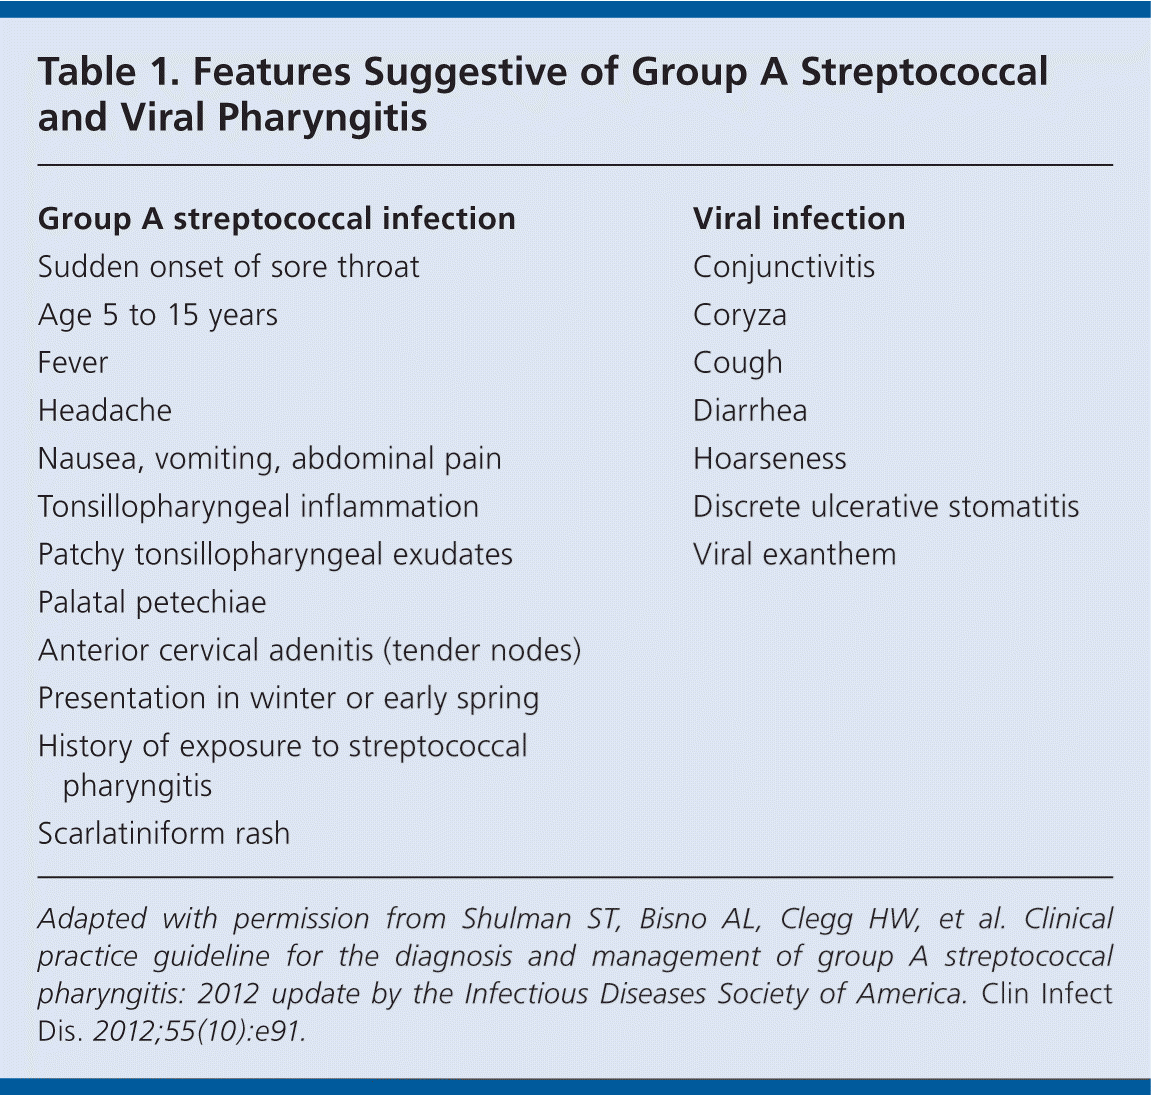 Idsa Updates Guideline For Managing Group A Streptococcal Pharyngitis ...